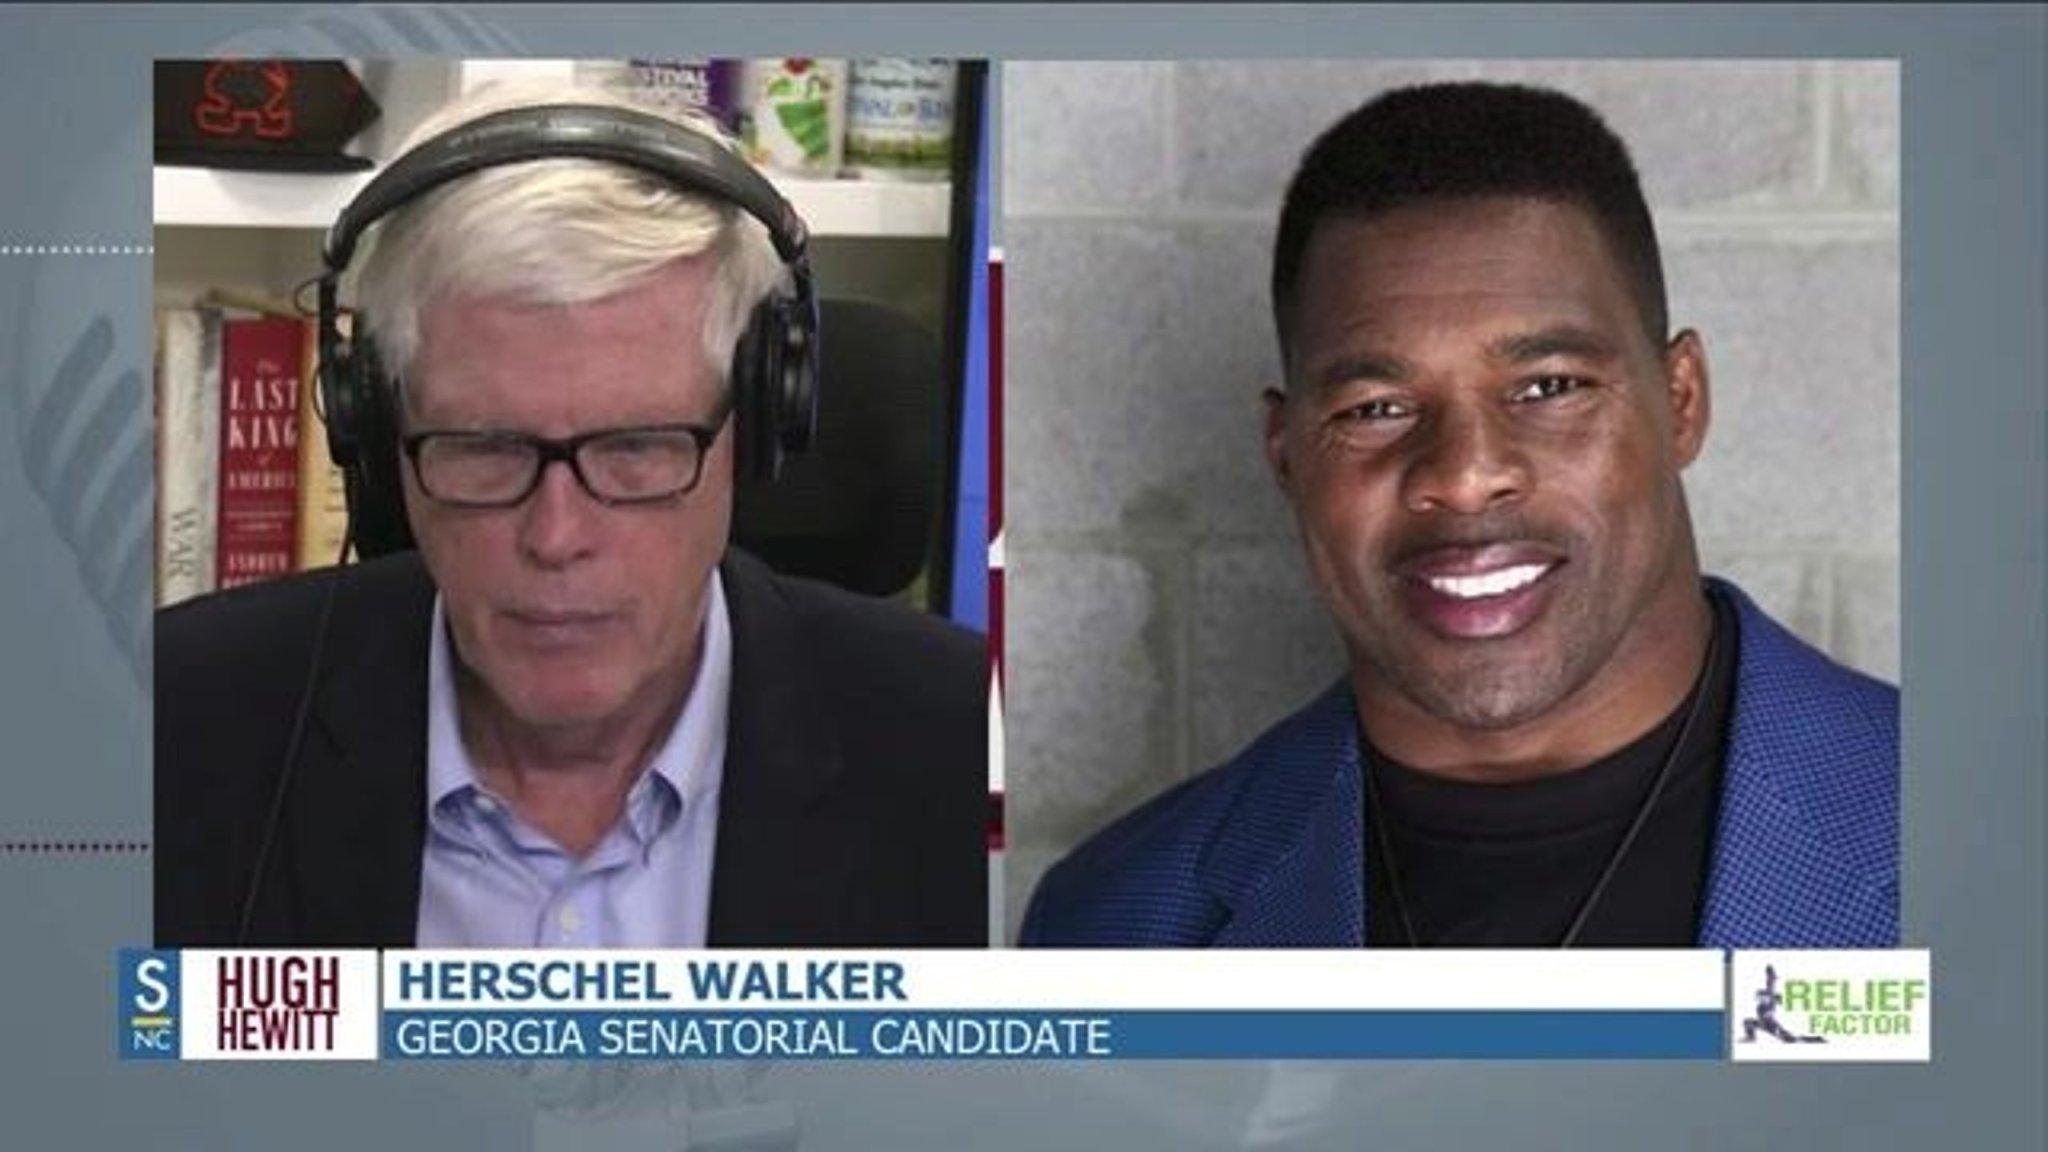 Herschel Walker on allegedly paying an ex to get an abortion: “If that had happened … there’s nothing to be ashamed of.”